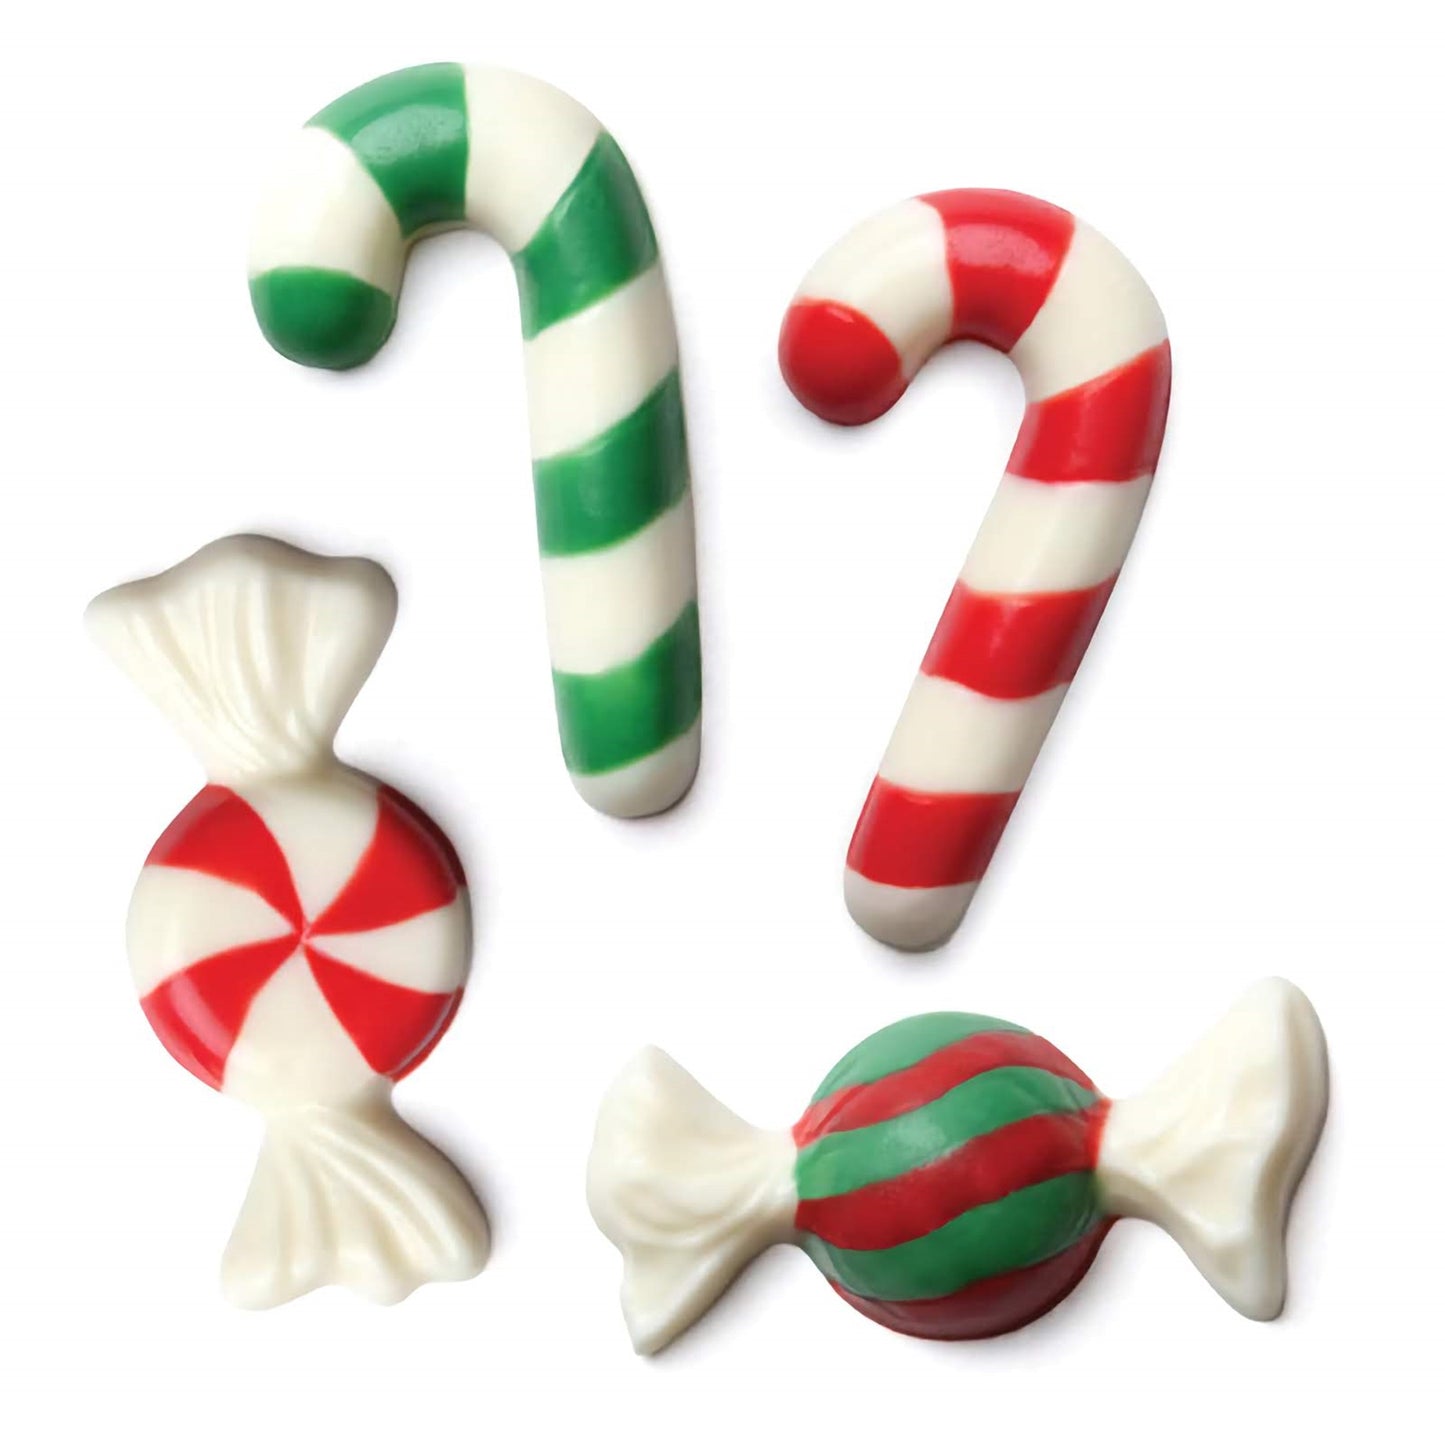 Confectionery mold-crafted miniature holiday candies featuring two green and white striped candy canes and two classic round peppermints, one in red and white and the other in green and white, all with a glossy, realistic appearance, evoking festive Christmas spirit.